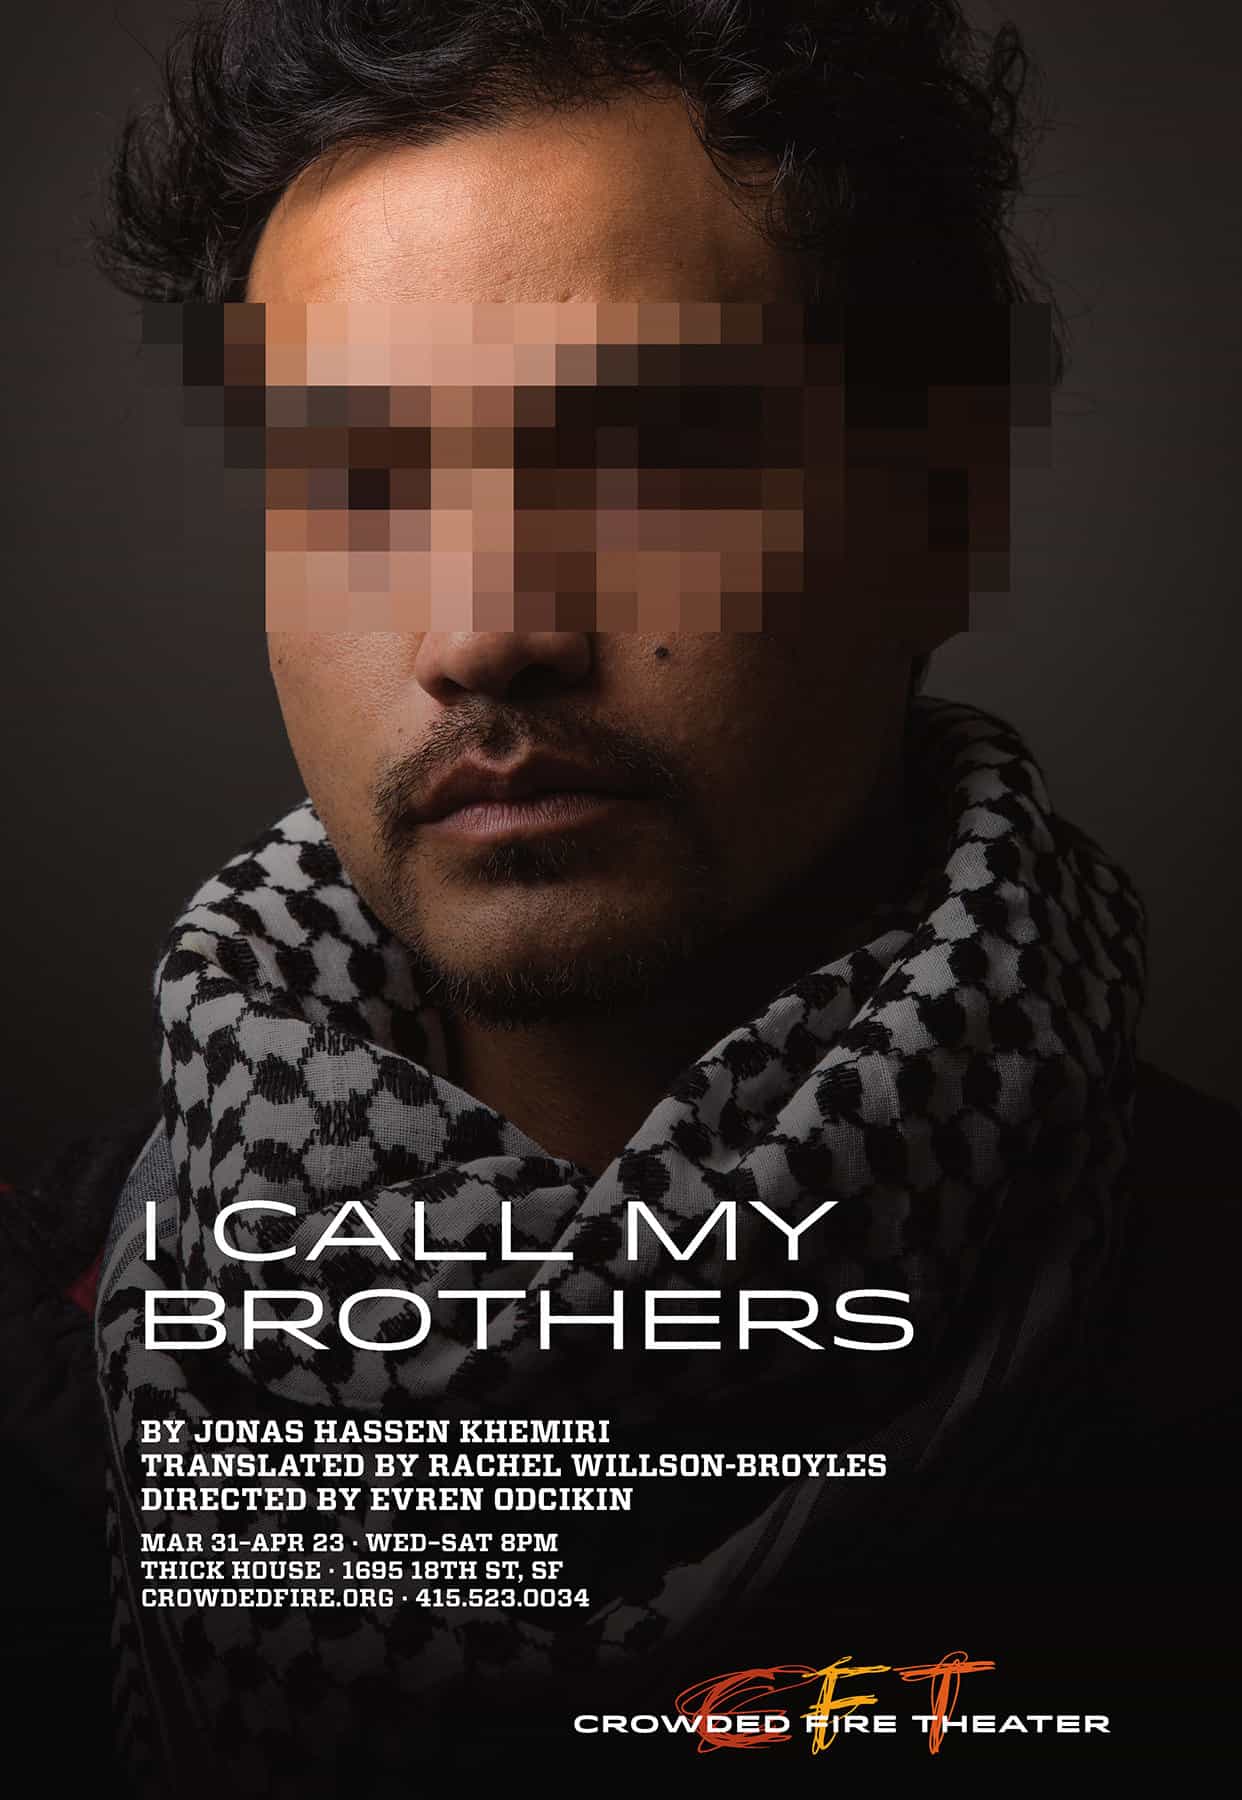 Poster for "I Call My Brothers" at Crowded Fire Theater. The image is a man with a Palestinian scarf around his neck. It's a stern portrait but the man's eyes are censored by being transformed into mosaic boxes of color that obscure his identity.